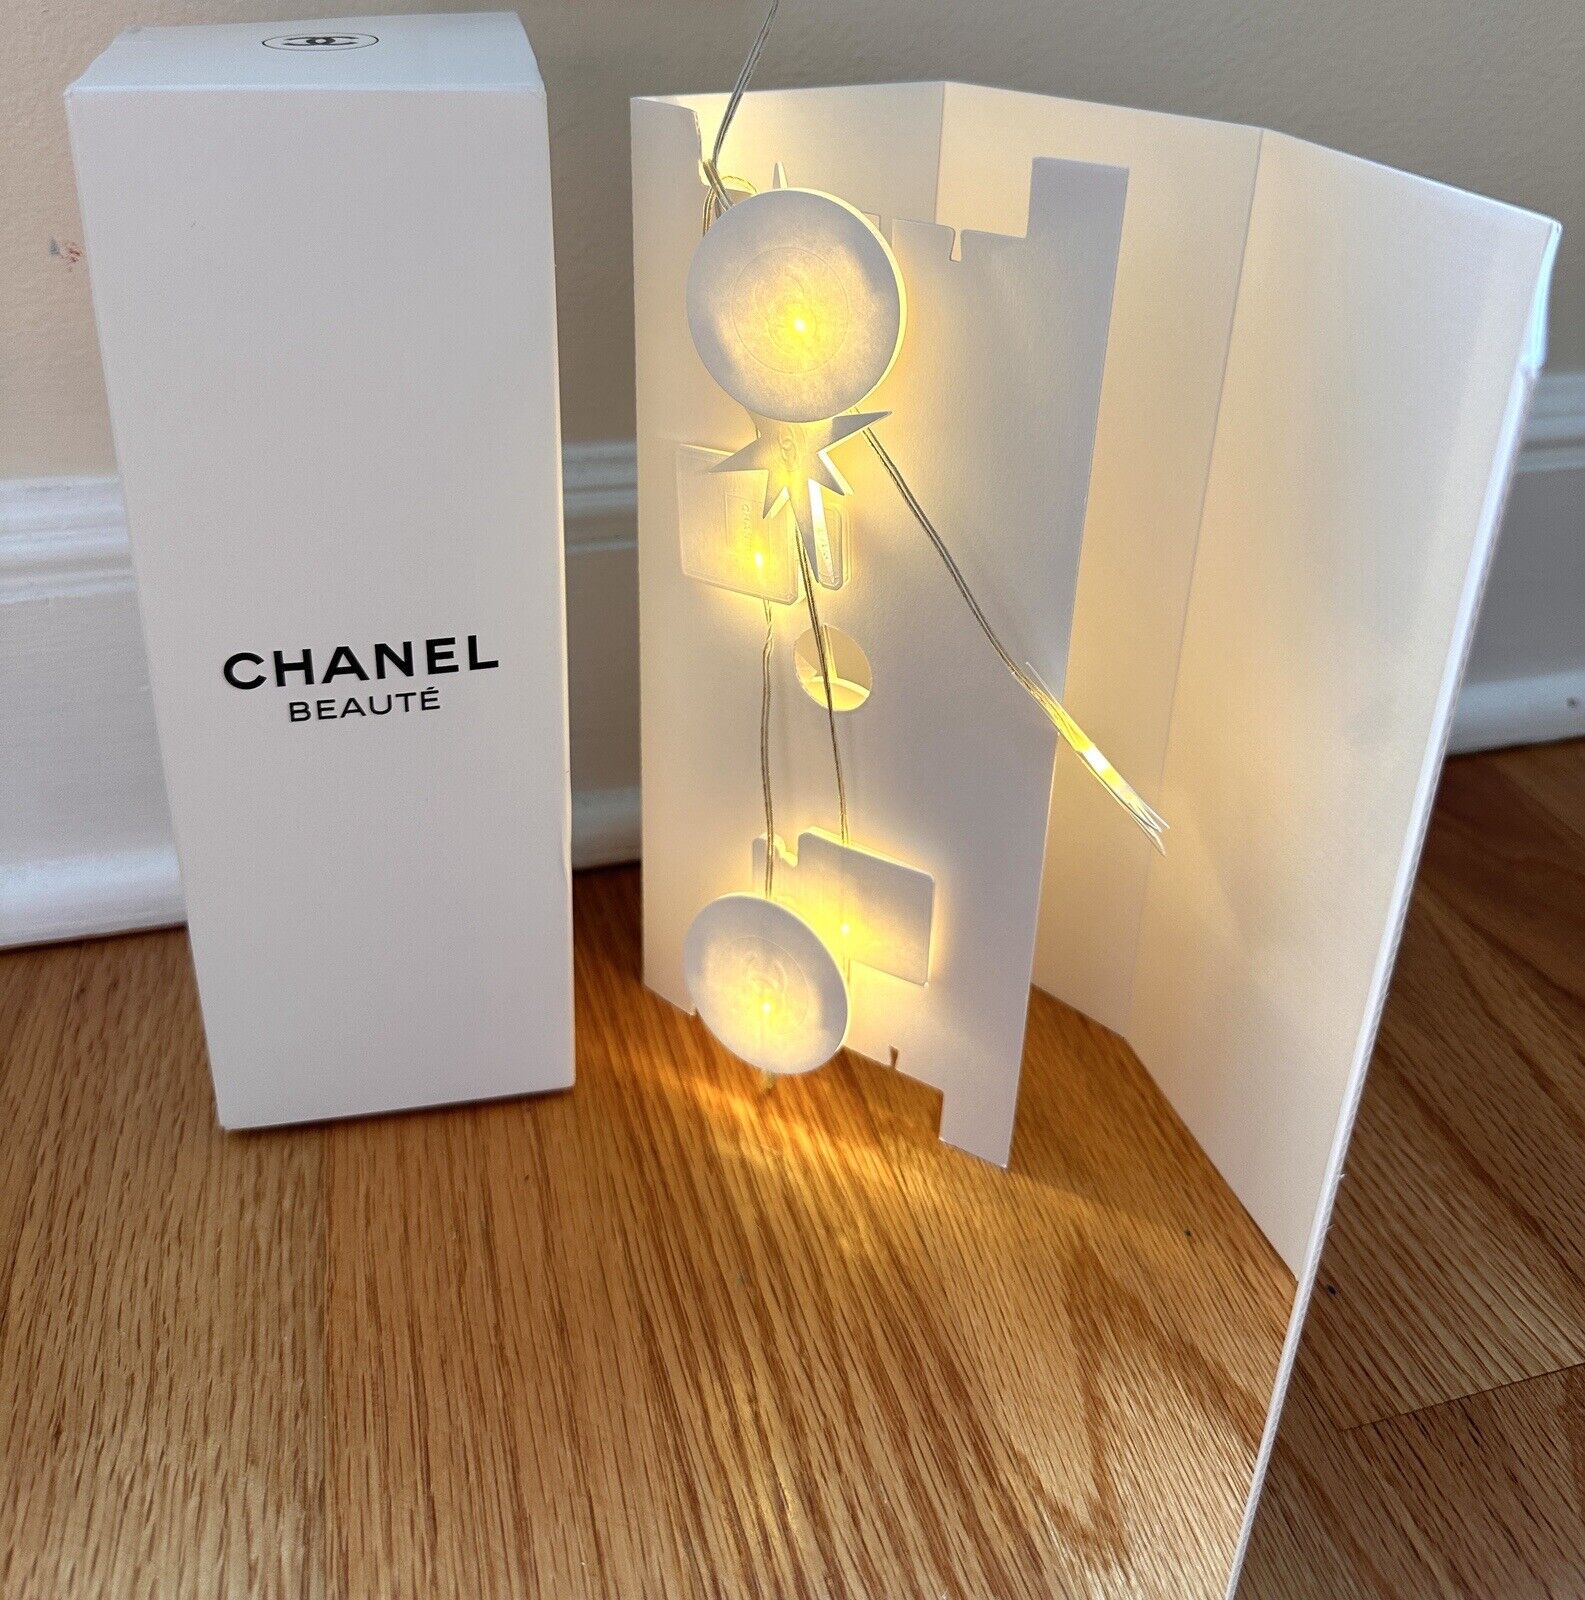 Authentic CHANEL Beaute Holiday Charismas Gift String USB Lights